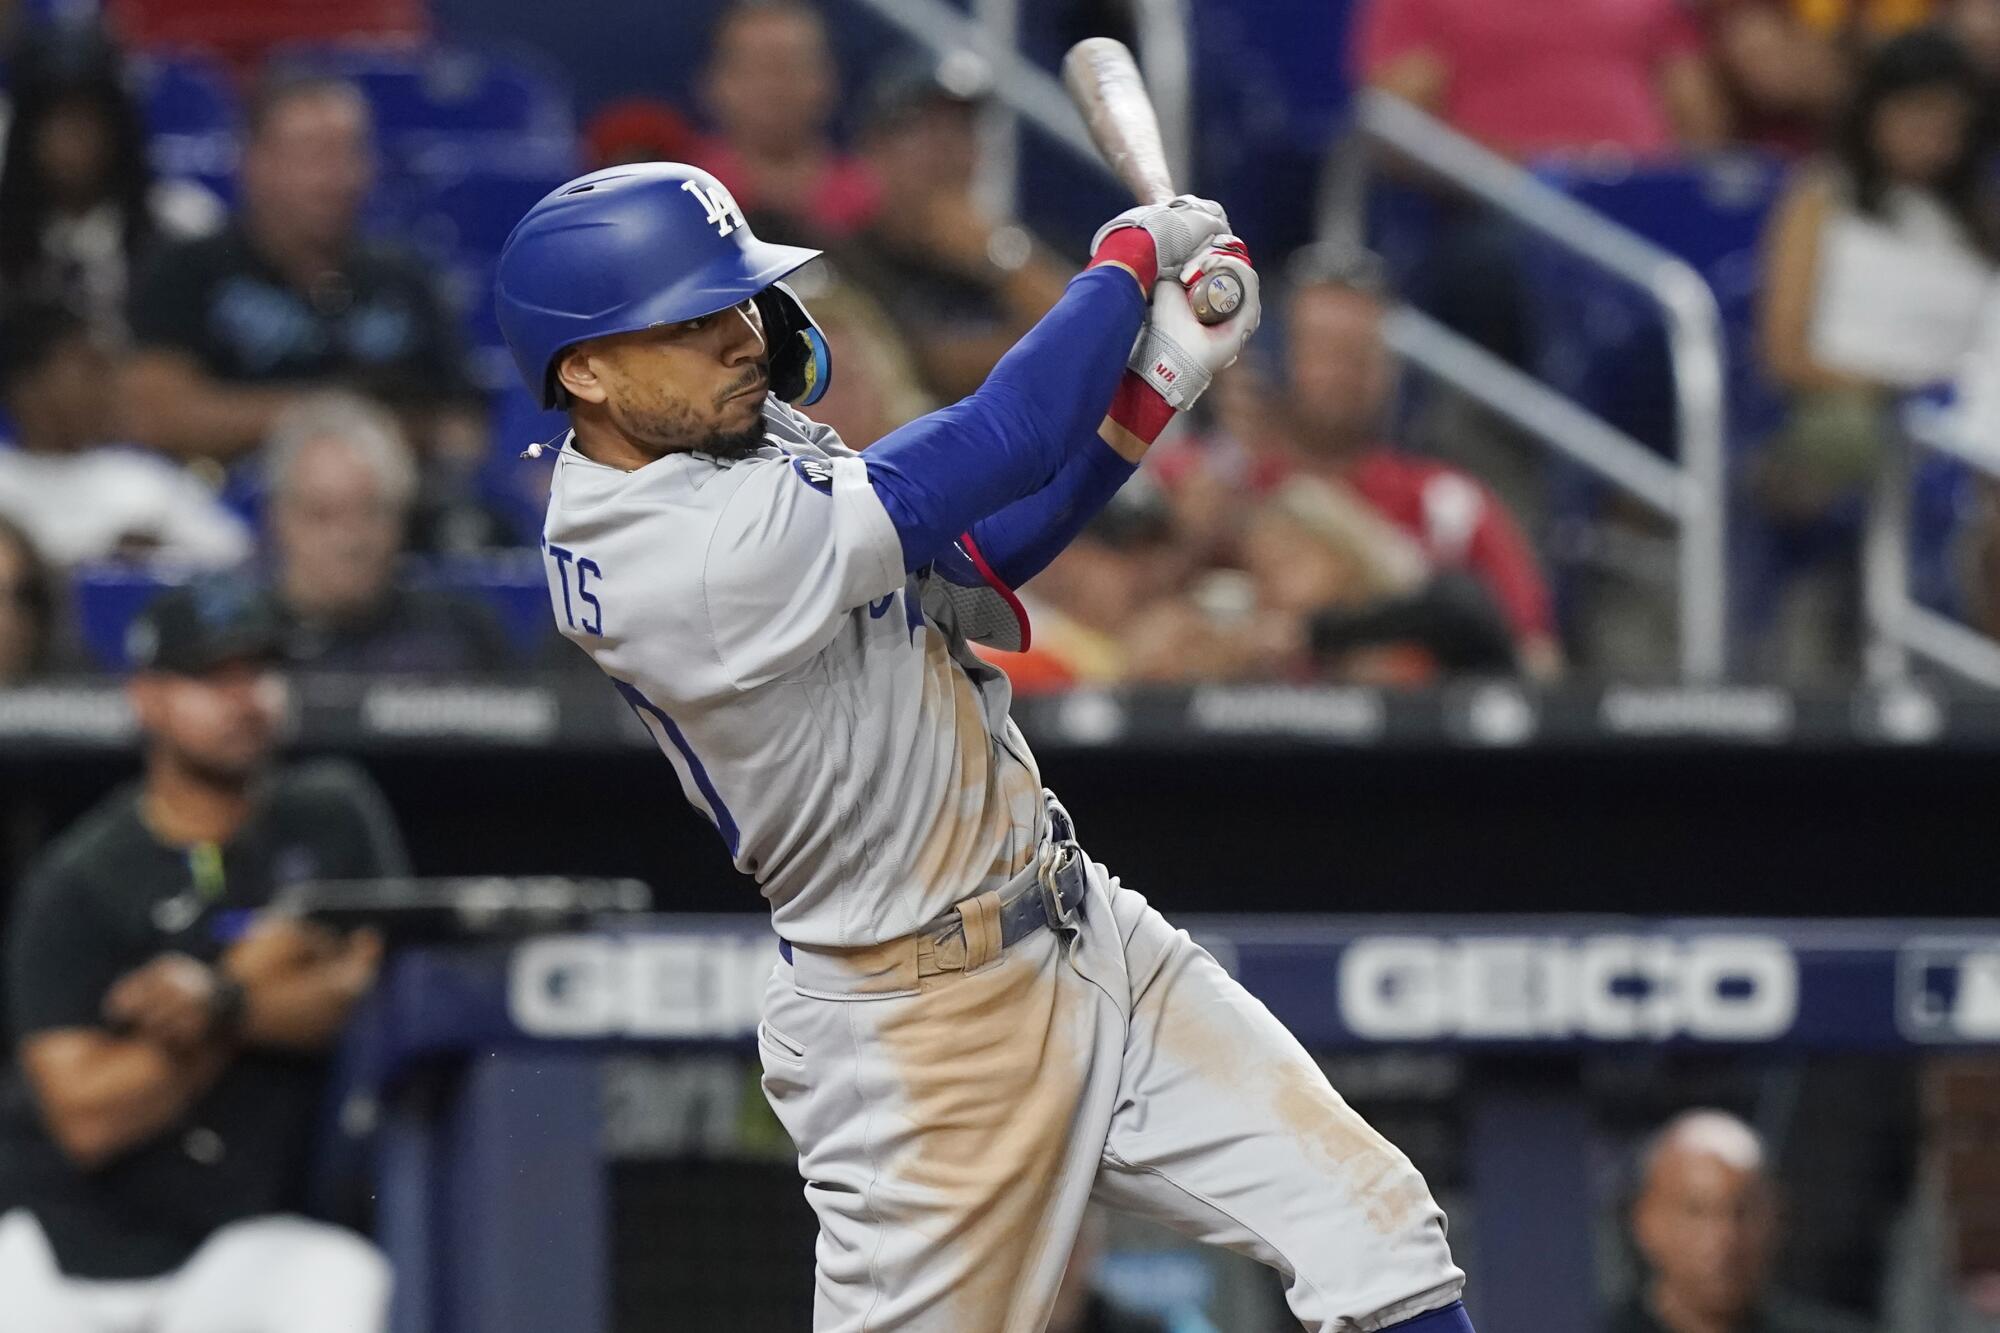 Dodgers right fielder Mookie Betts hits a two-run home run in the seventh inning.